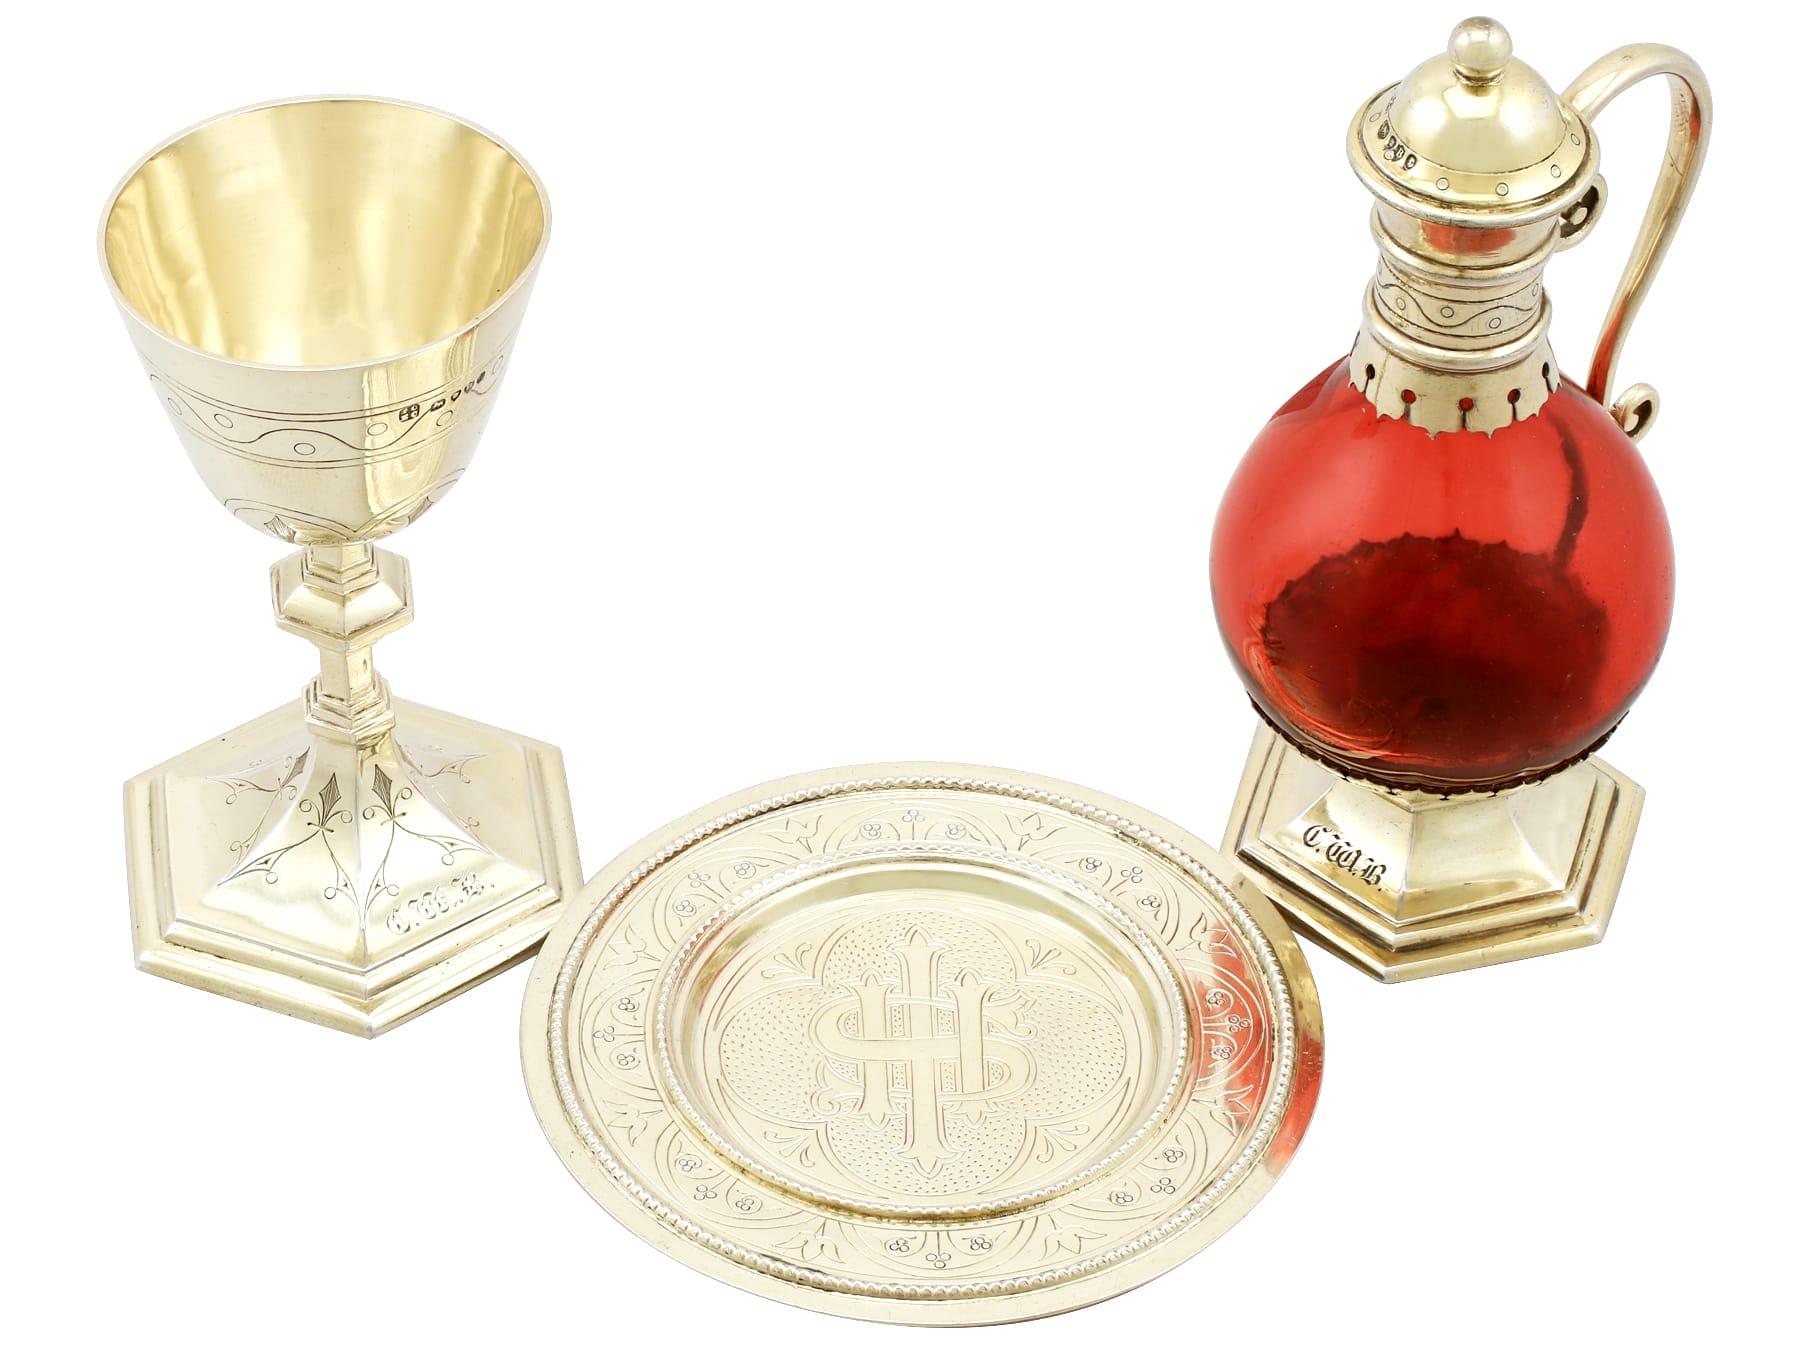 An exceptional, fine and impressive antique Victorian English sterling silver gilt and cranberry coloured glass communion set; an addition to our diverse religious silverware collection.

This exceptional antique Victorian cast sterling silver